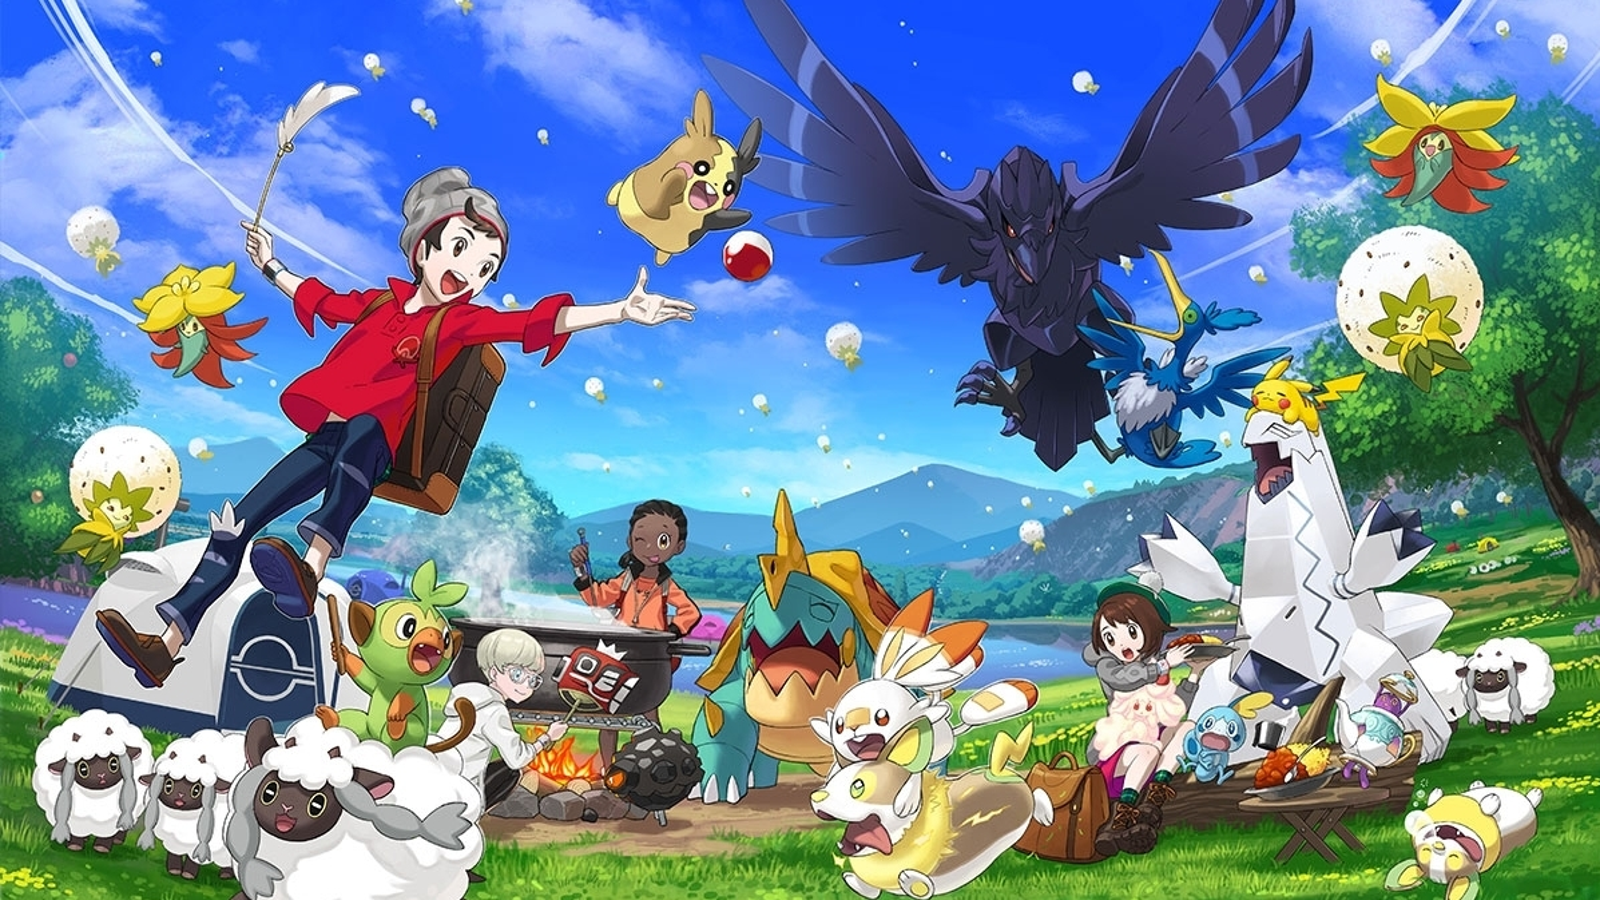 10 Of The Darkest Things You Can Do In Pokemon: Sword & Shield